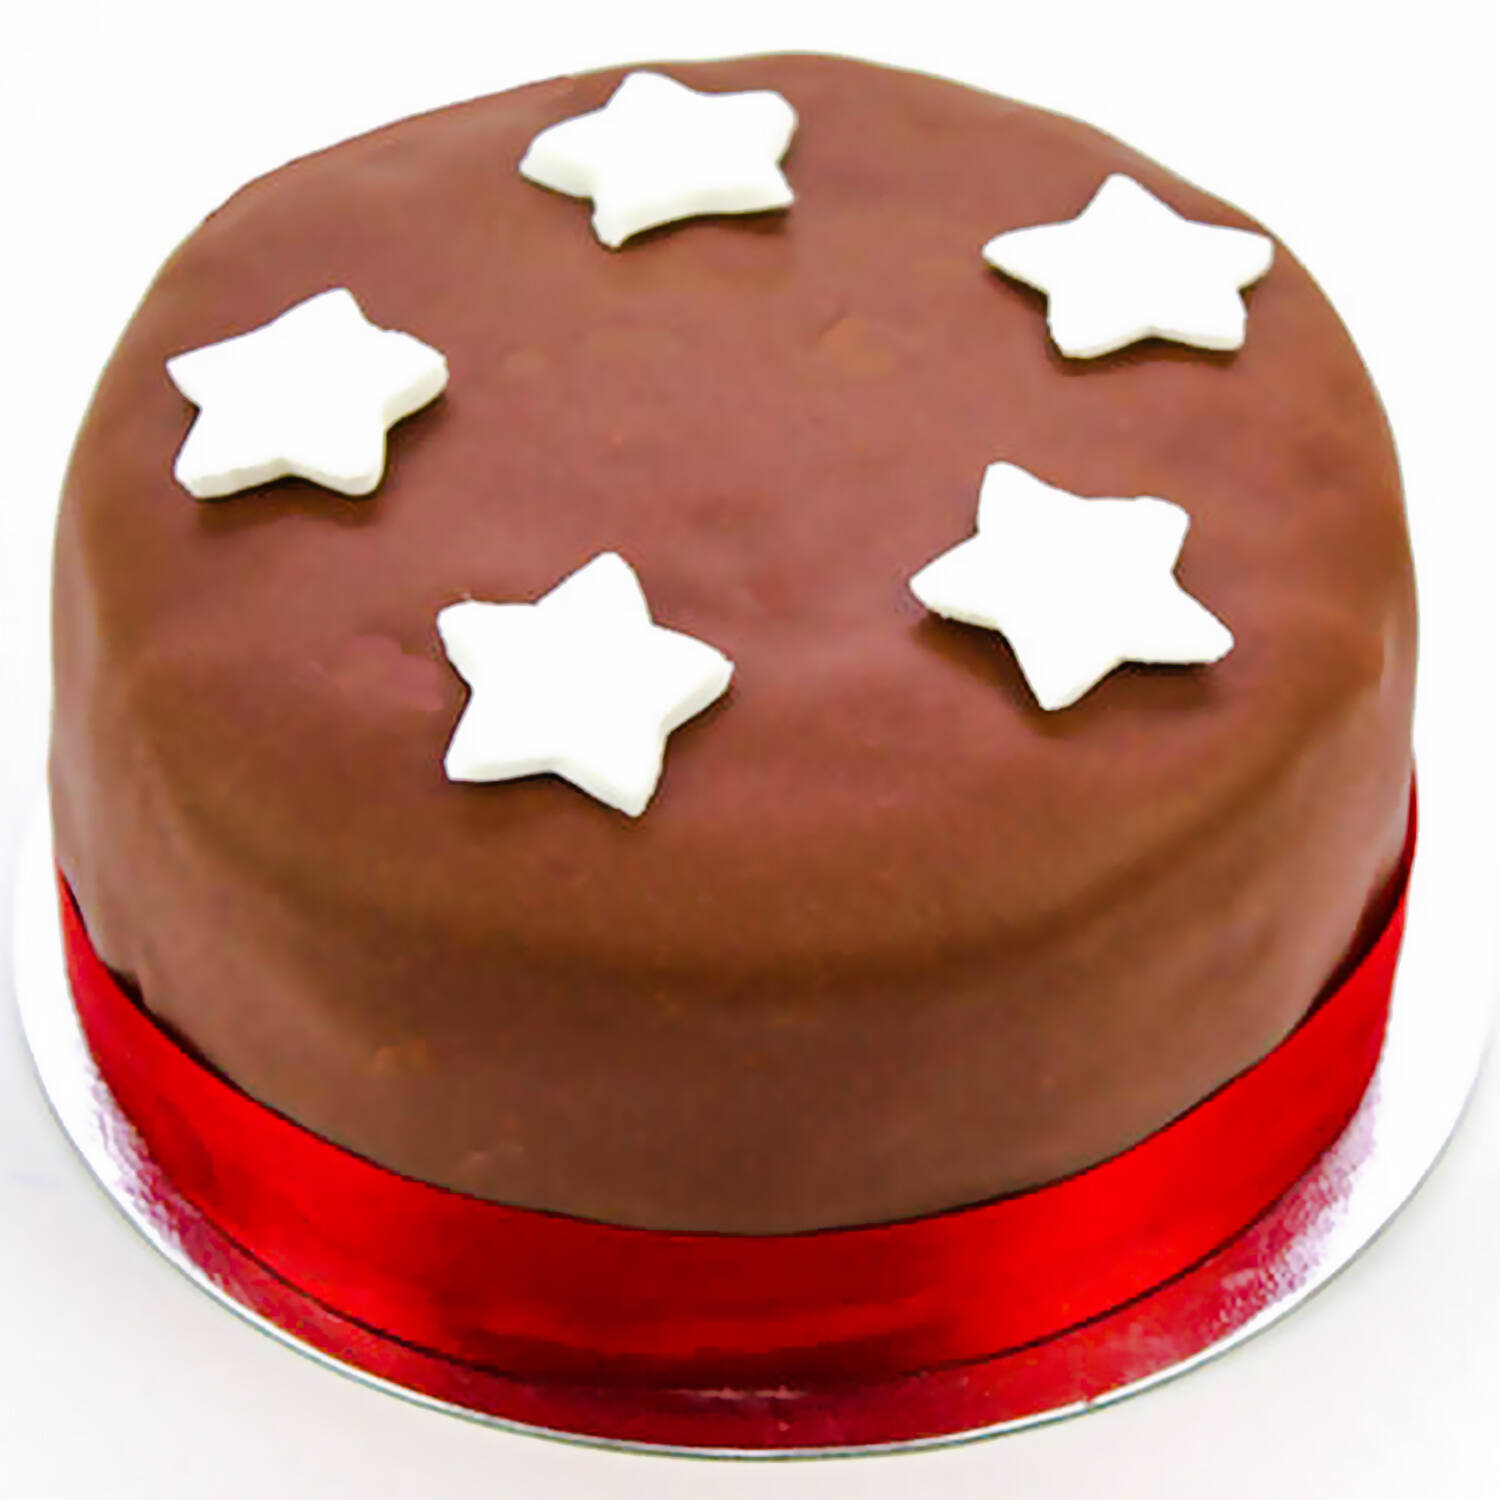 Stars Theme Cake - Online flowers delivery to moradabad